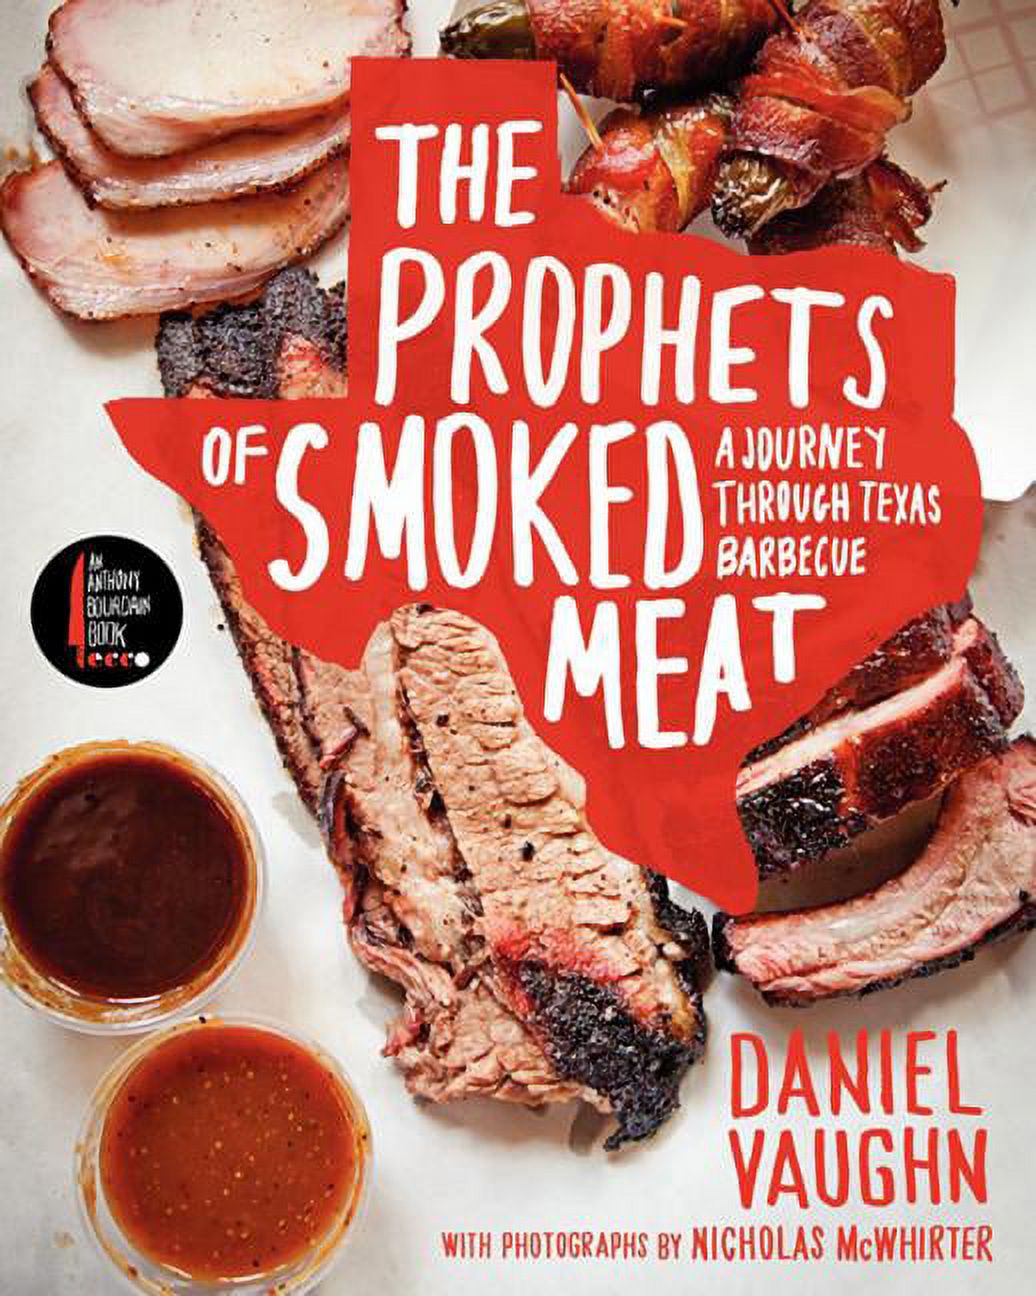 The Prophets of Smoked Meat (Hardcover) - image 1 of 1